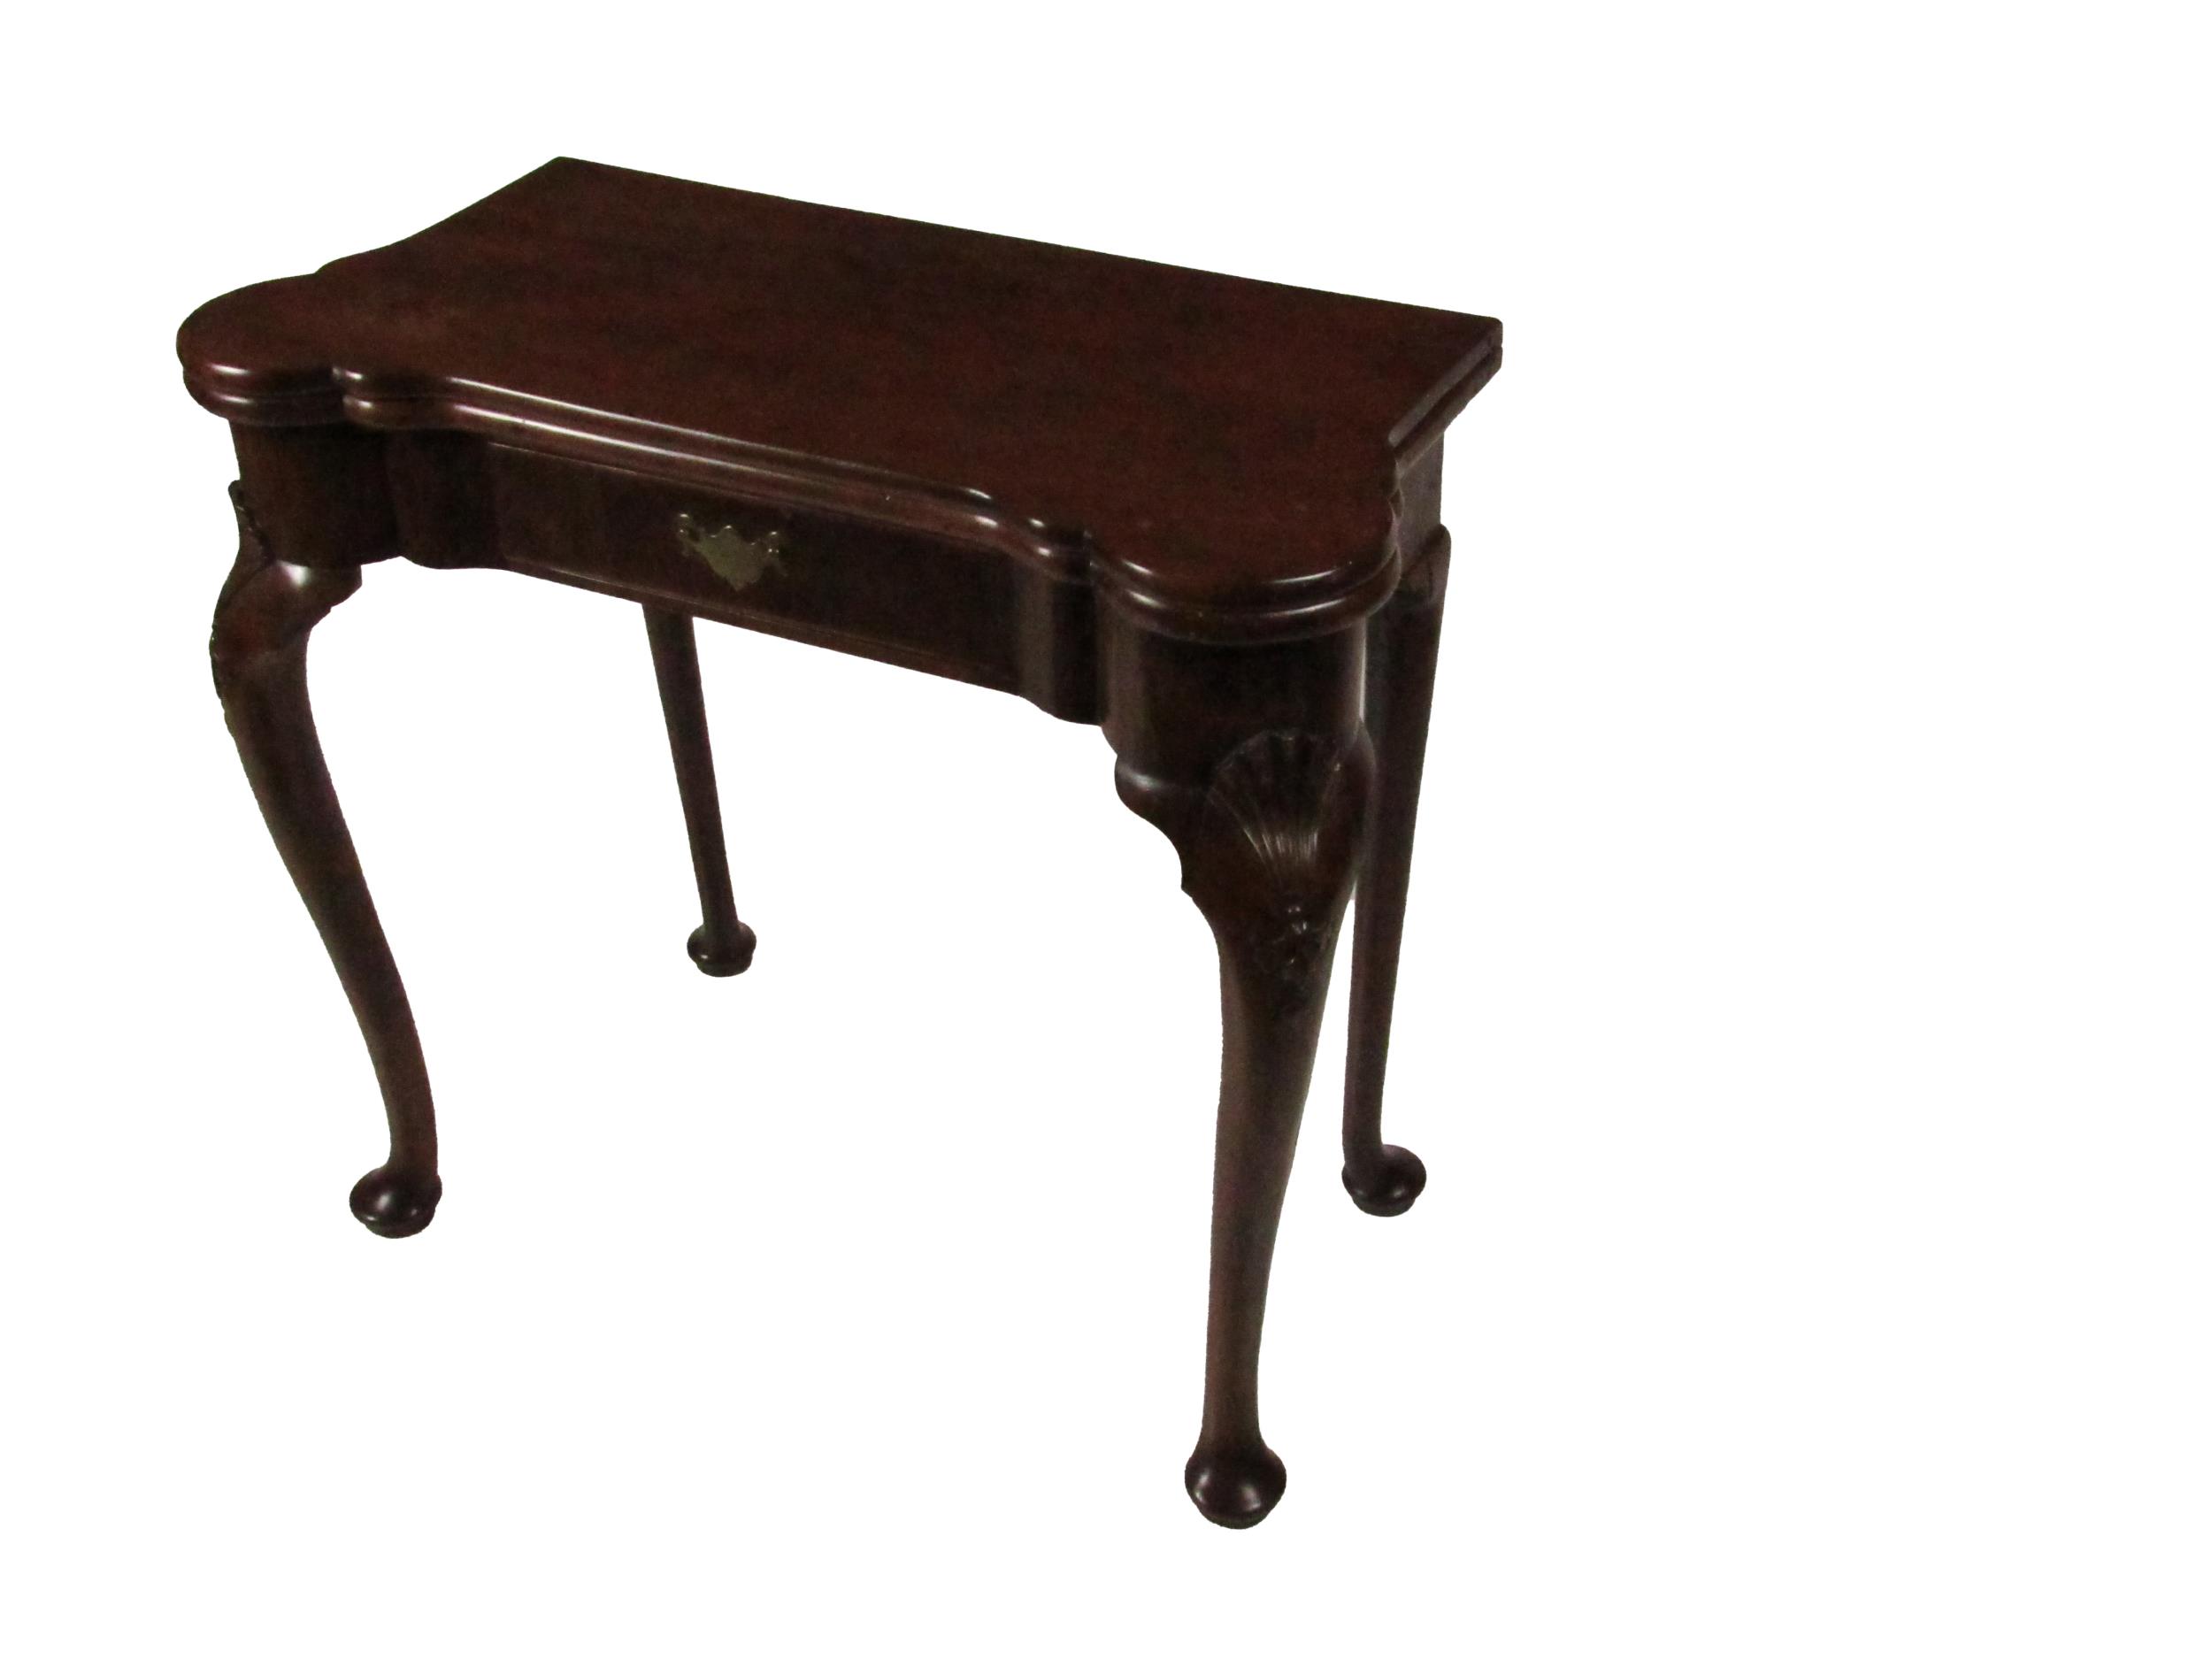 An Irish Georgian period mahogany fold-over Card Table, the shaped top opening to reveal a baize